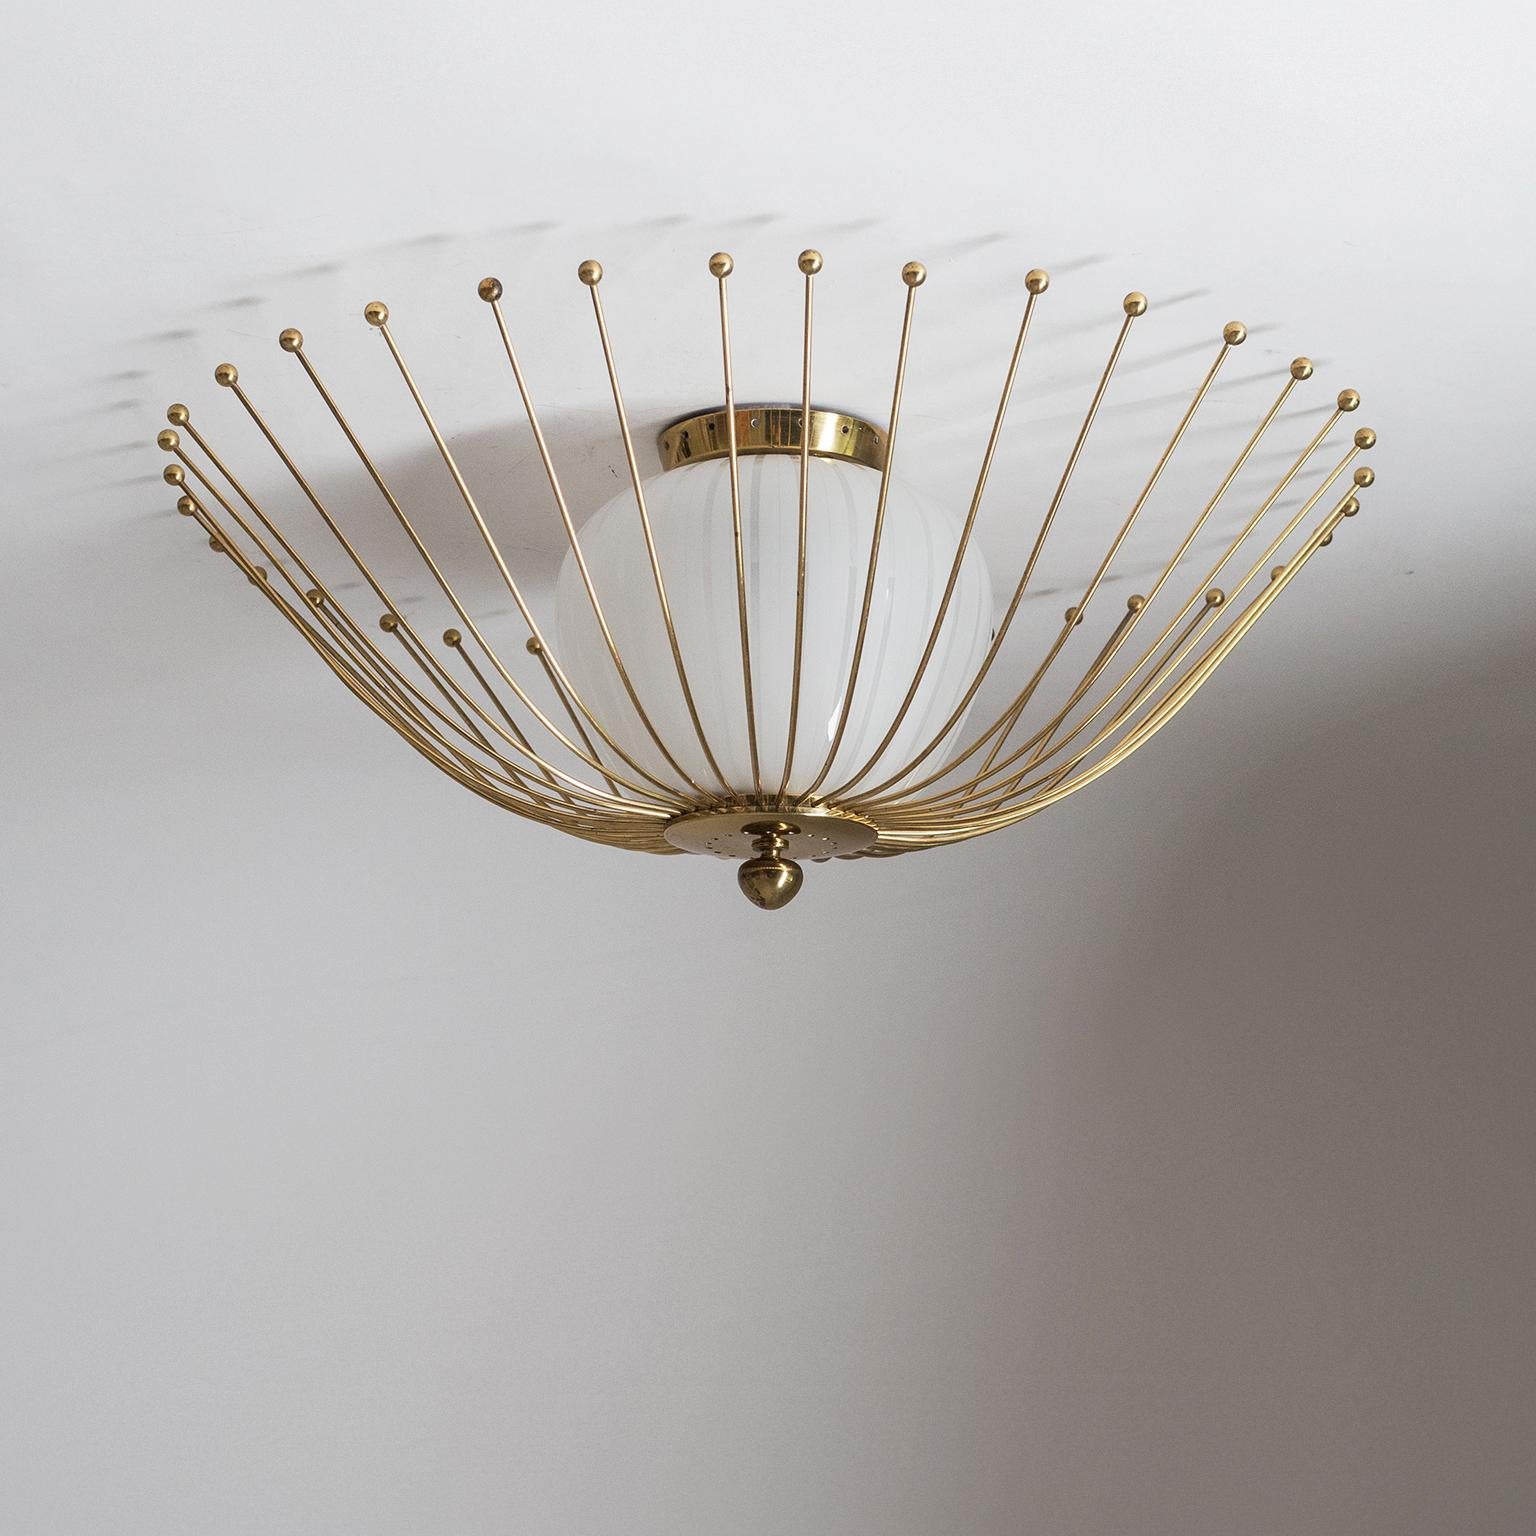 Rare brass and glass flush mount from the 1940-1950s. A satin glass diffuser with clear stripes is surrounded by a polished brass cage consisting of a multitude of curved brass wires, each with a brass ball at the end which hovers just slightly